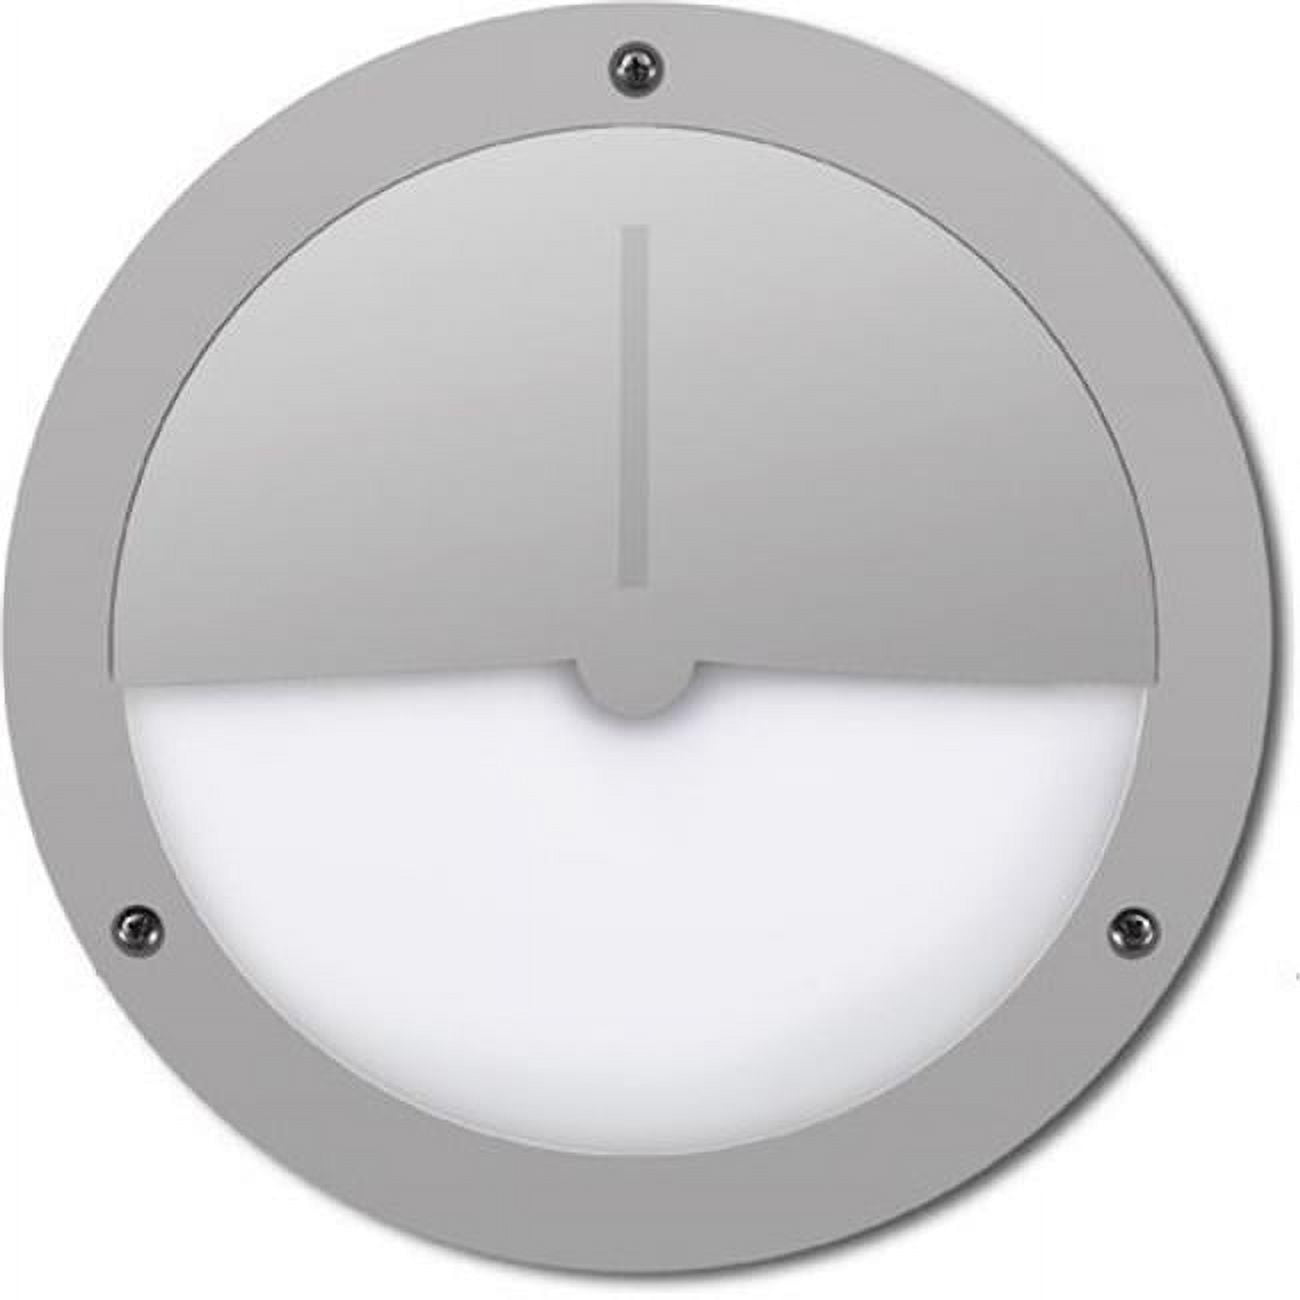 Picture of Dabmar Lighting W3843-SS Powder Coated Cast Aluminum Surface Mounted Wall Fixture, Stainless Steel